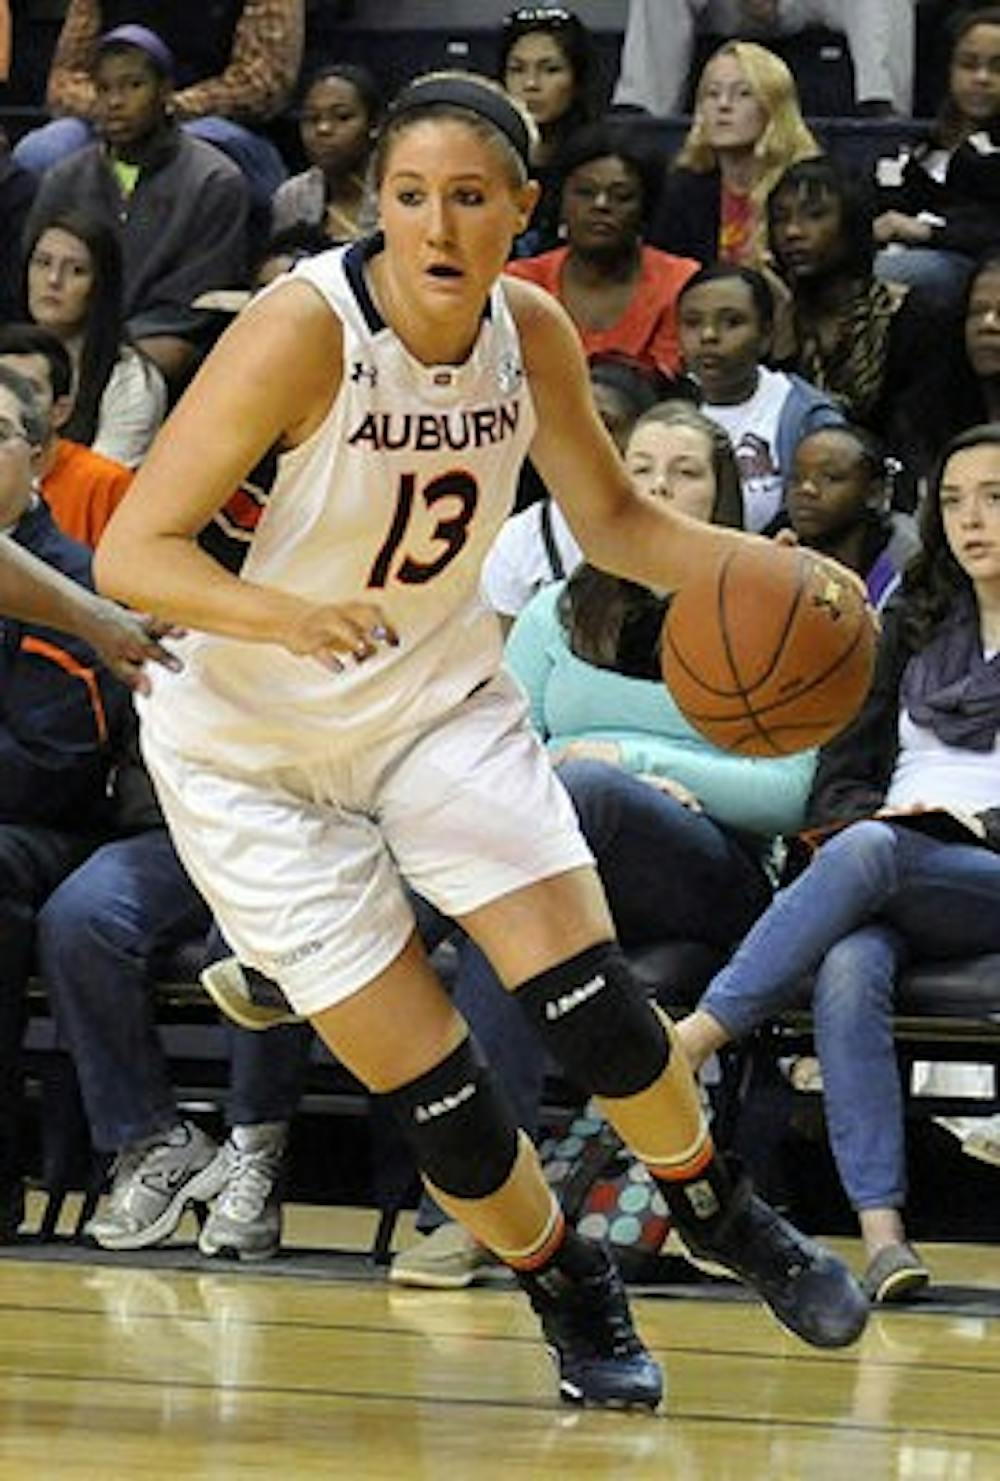 Katy Frerking drives to the basket against Georgia (Photo contributed by Anthony Hall)